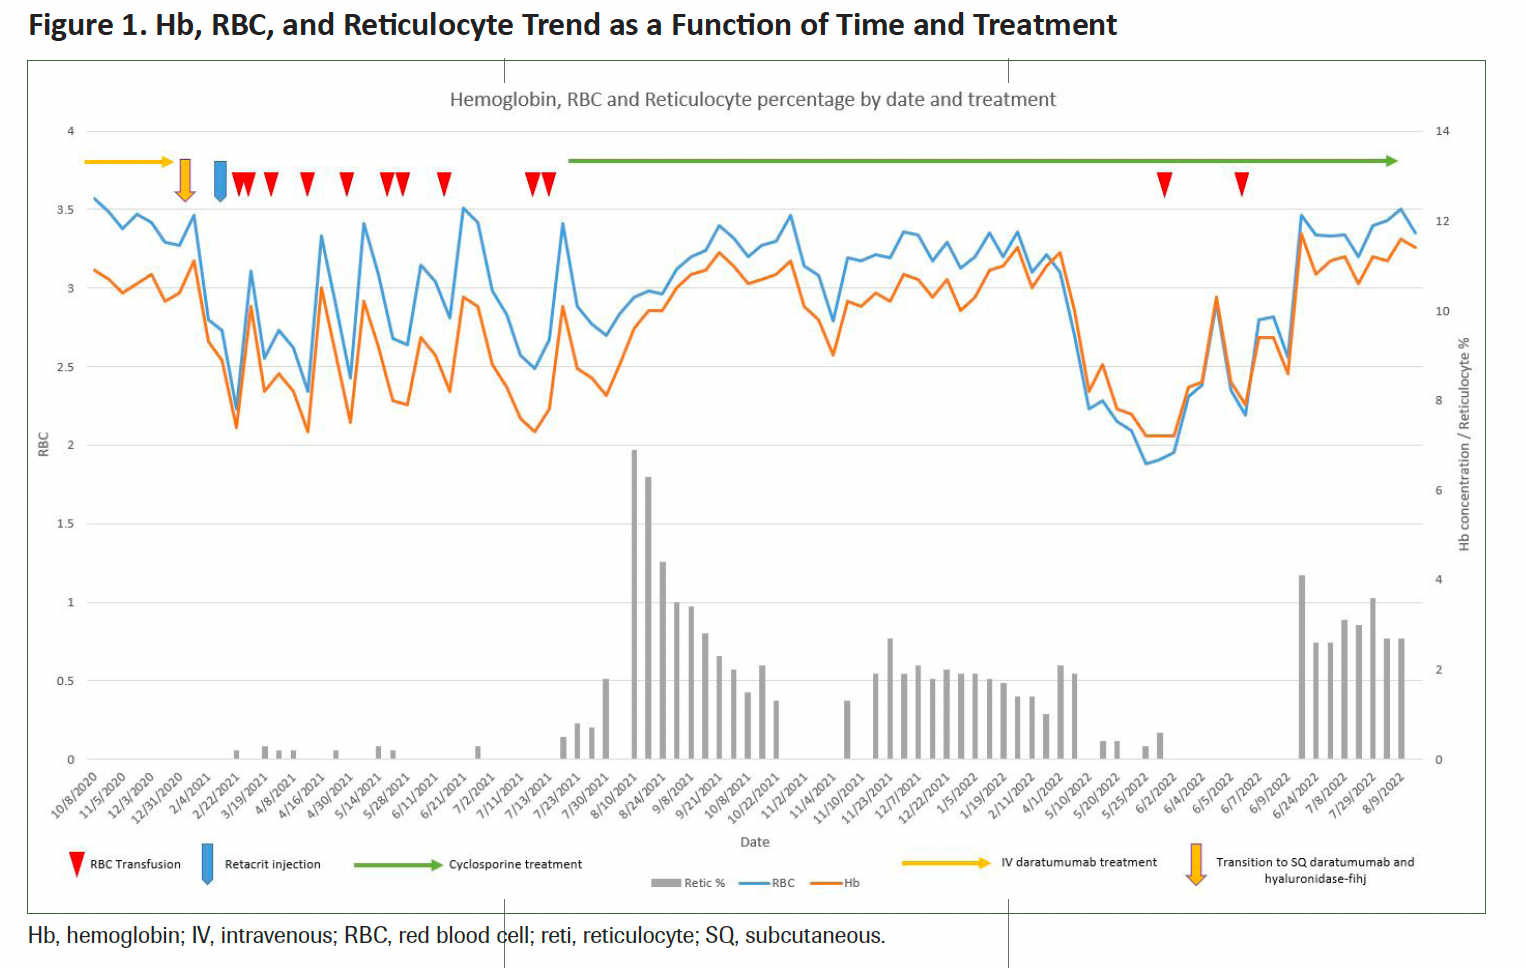 Figure 1. Hb, RBC, and Reticulocyte Trend as a Function of Time and Treatment